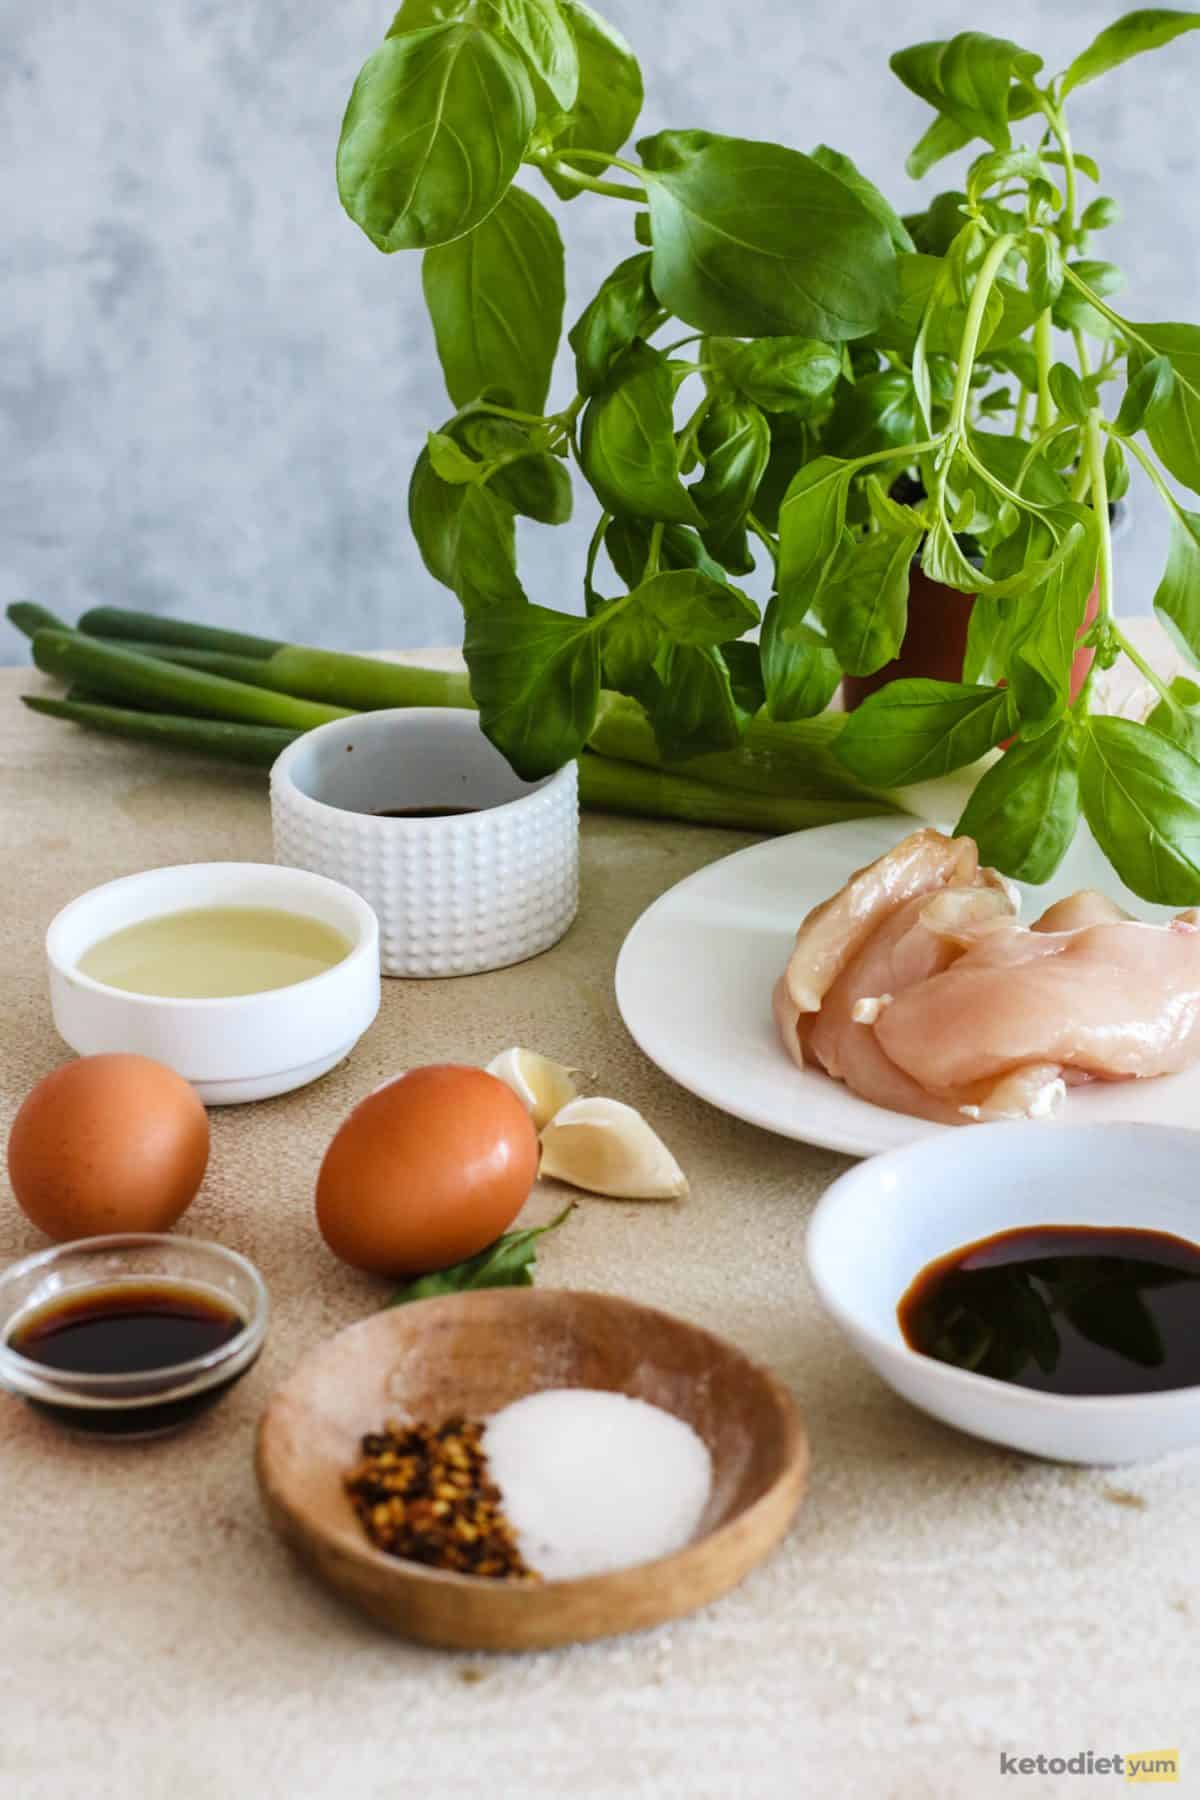 Ingredients arranged on a table to make low carb Thai basil chicken